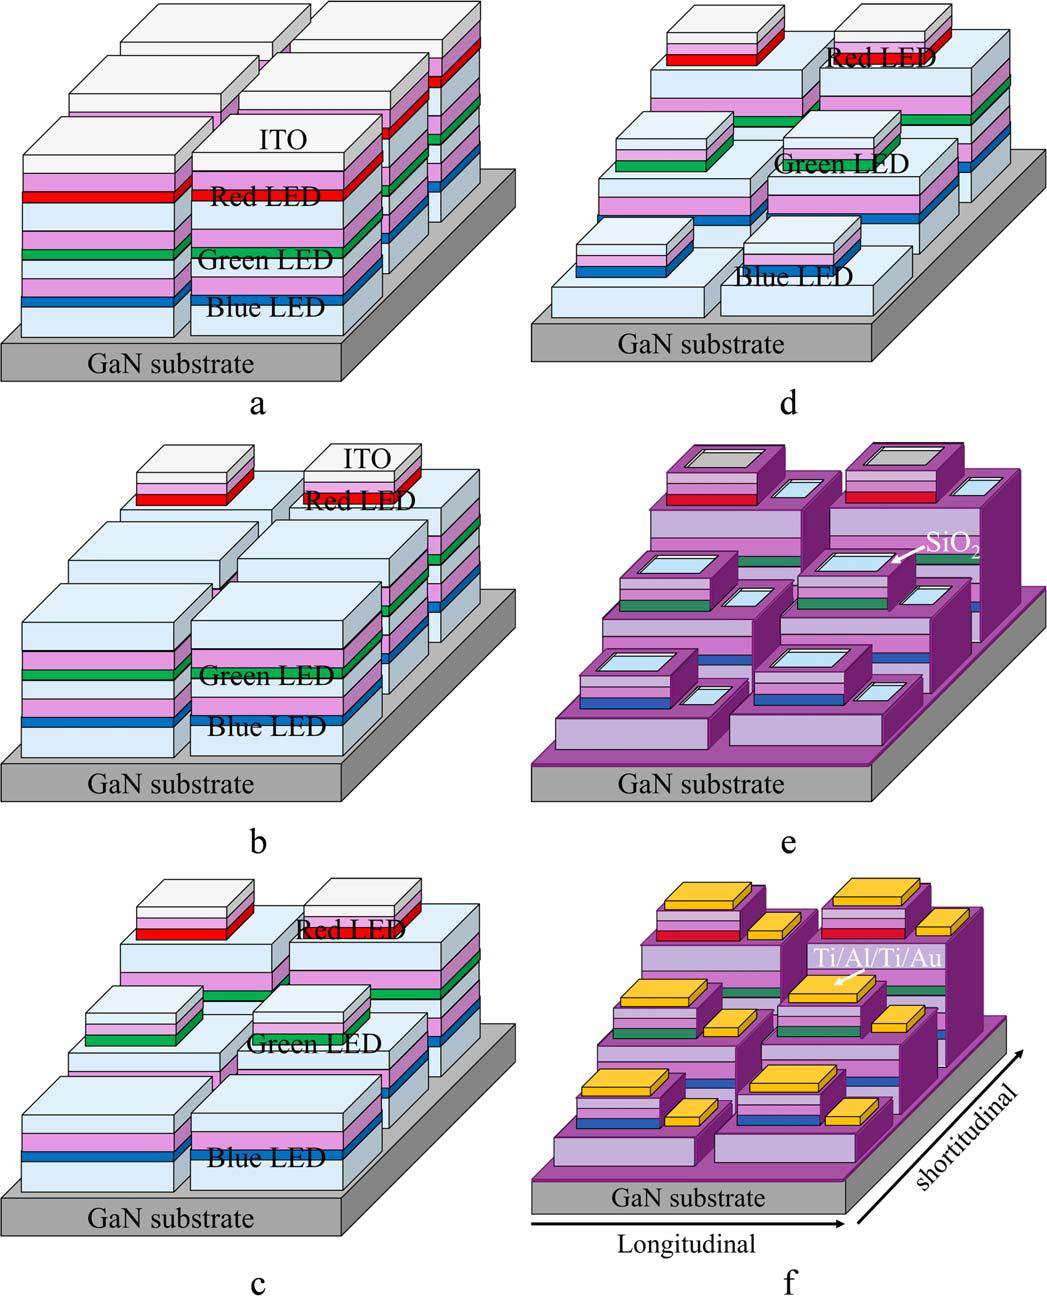 Figure 2: Schematic process flow of μLED array: (a) ITO p-type electrode formation and device separation by etching, (b) red μLED mesa fabrication, (c) green μLED mesa fabrication, (d) blue μLED mesa fabrication, (e) SiO2 passivation film formation, (f) n-electrode formation.